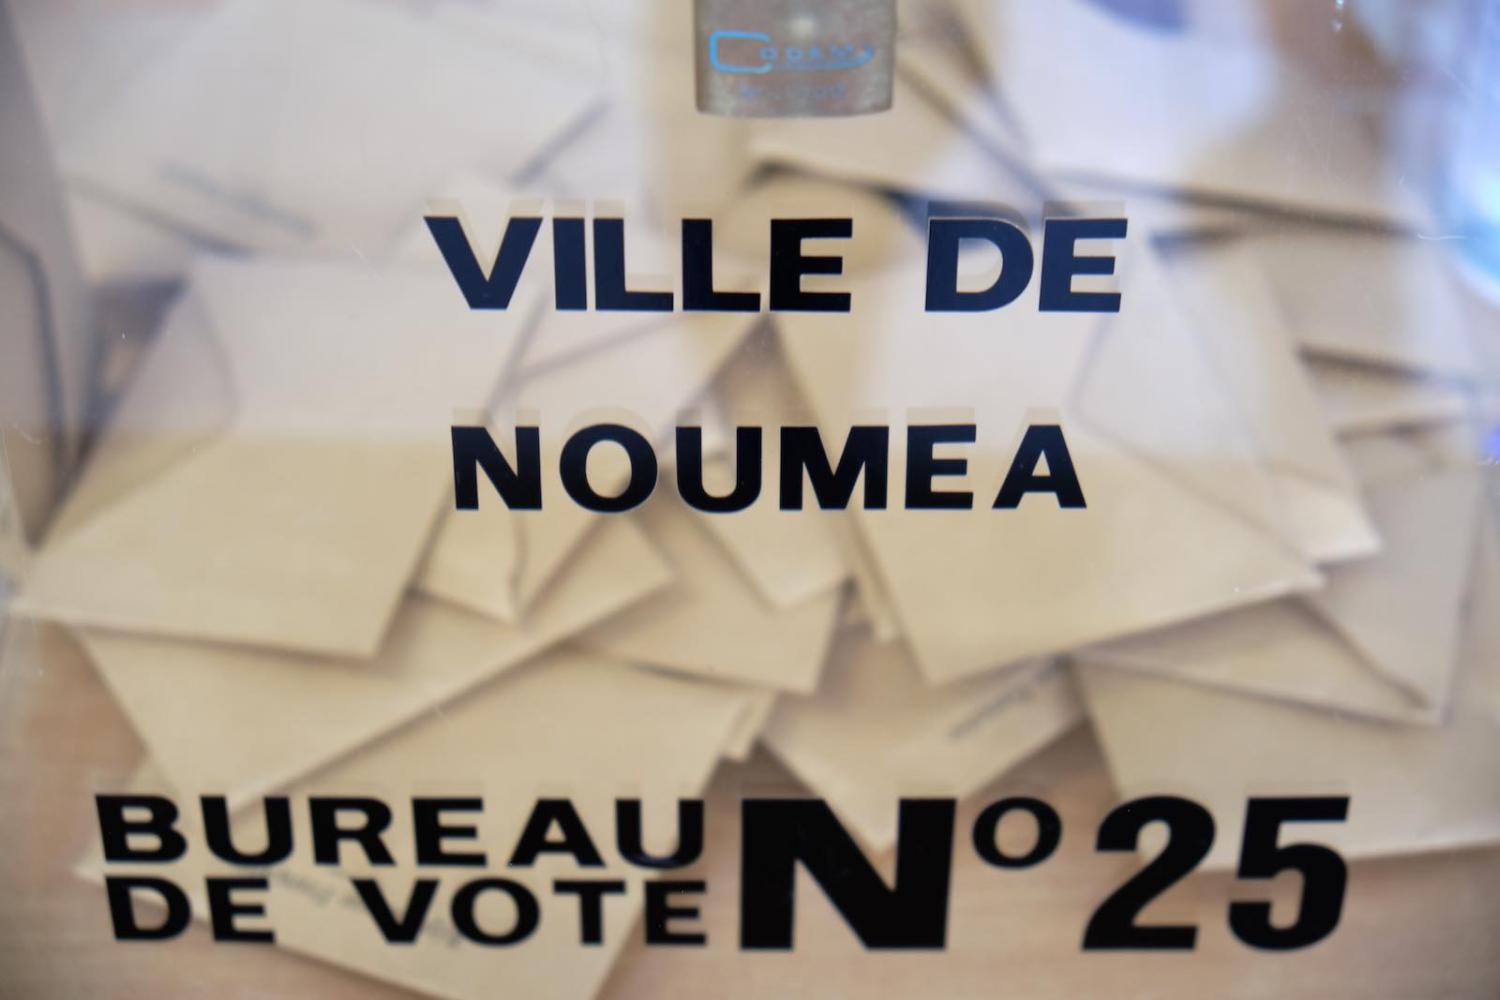 Ballots in the Magenta district of Noumea, New Caledonia during the first round of mayoral elections in France in March (Theo Rouby/AFP/Getty Images)